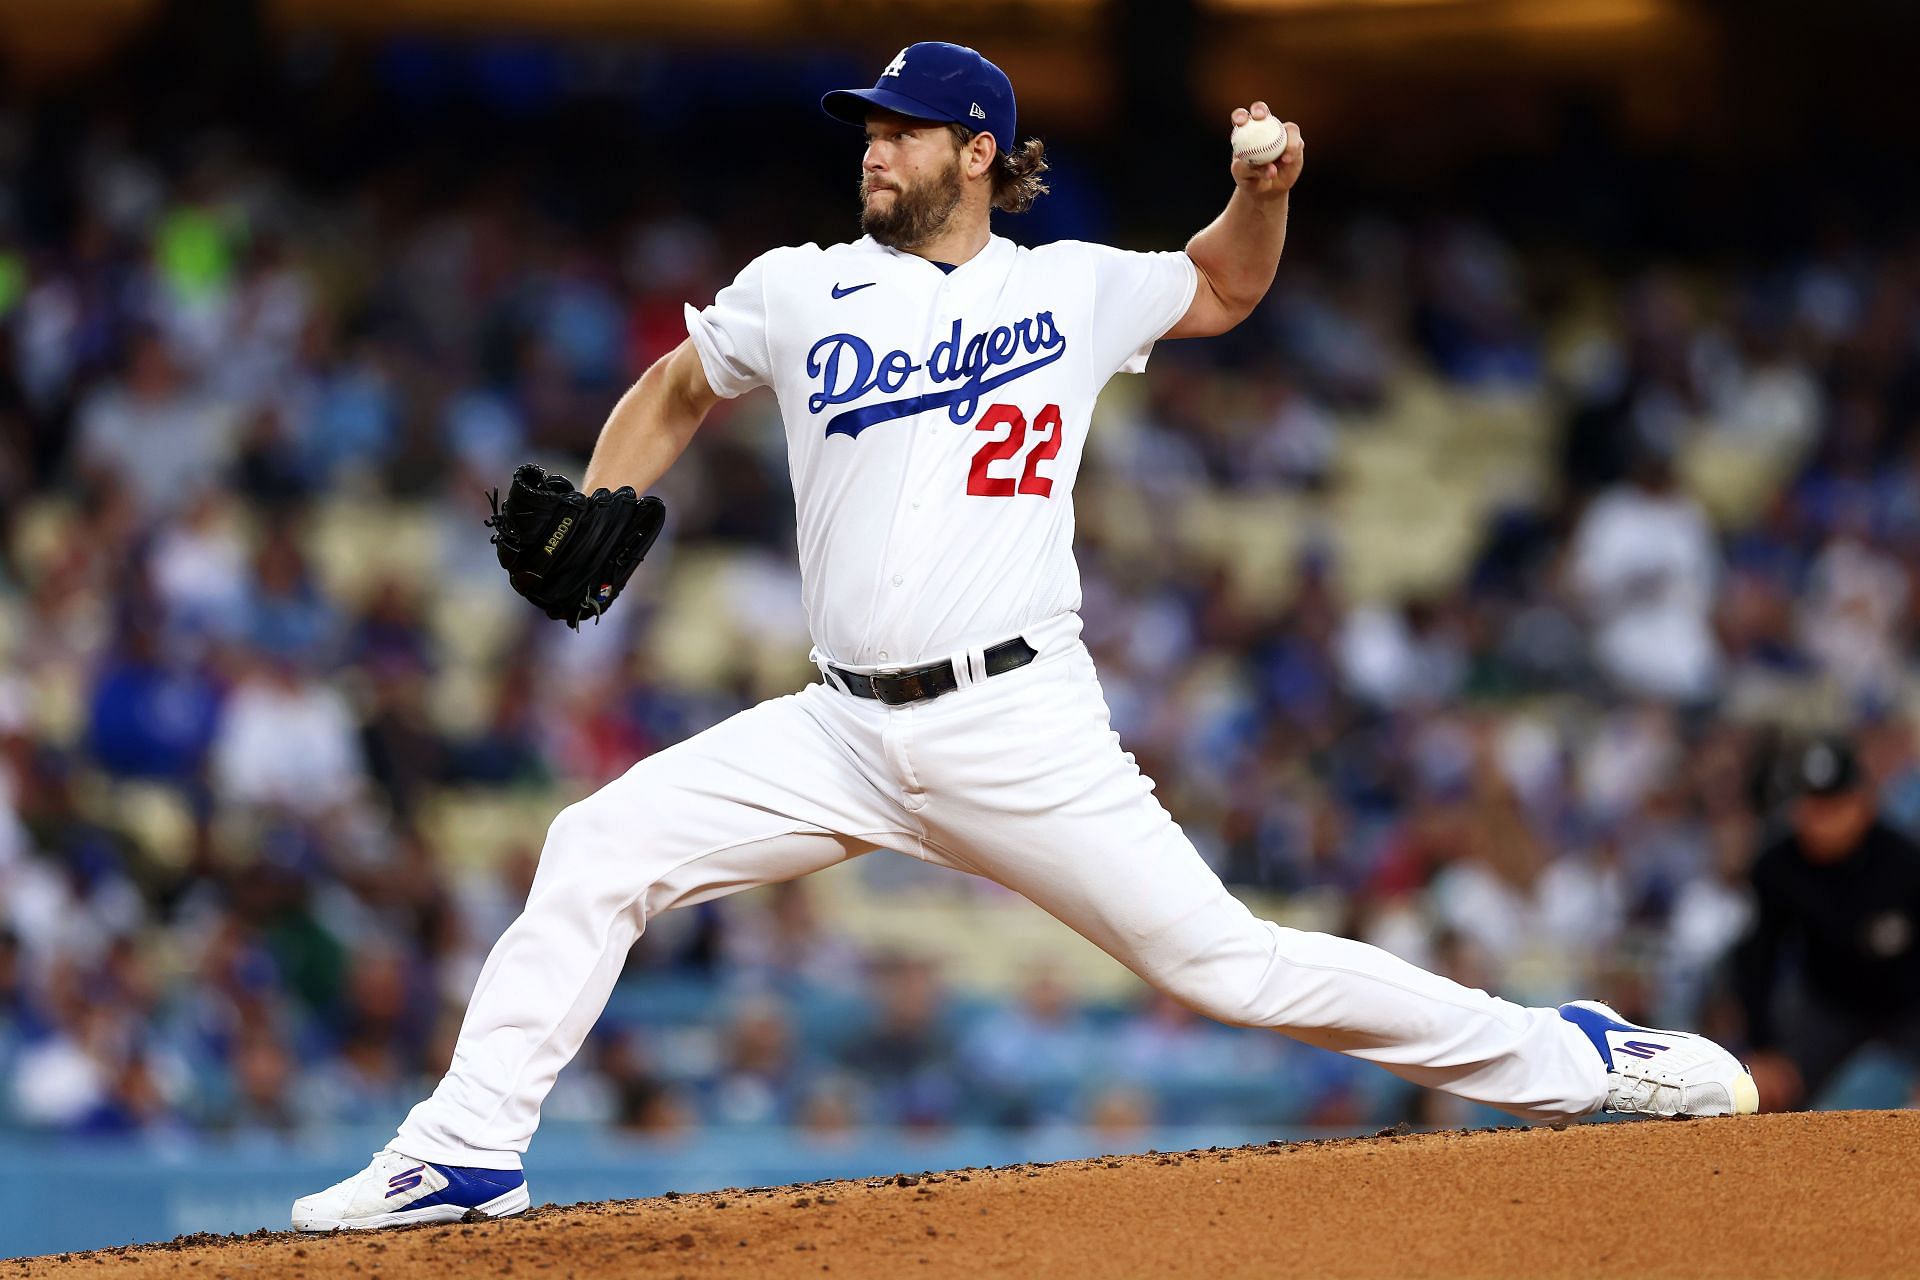 Minnesota Twins v Los Angeles Dodgers LOS ANGELES, CALIFORNIA - MAY 16: Clayton Kershaw #22 of the Los Angeles Dodgers pitches during the second inning against the Minnesota Twins at Dodger Stadium on May 16, 2023, in Los Angeles, California. (Photo by Katelyn Mulcahy/Getty Images)